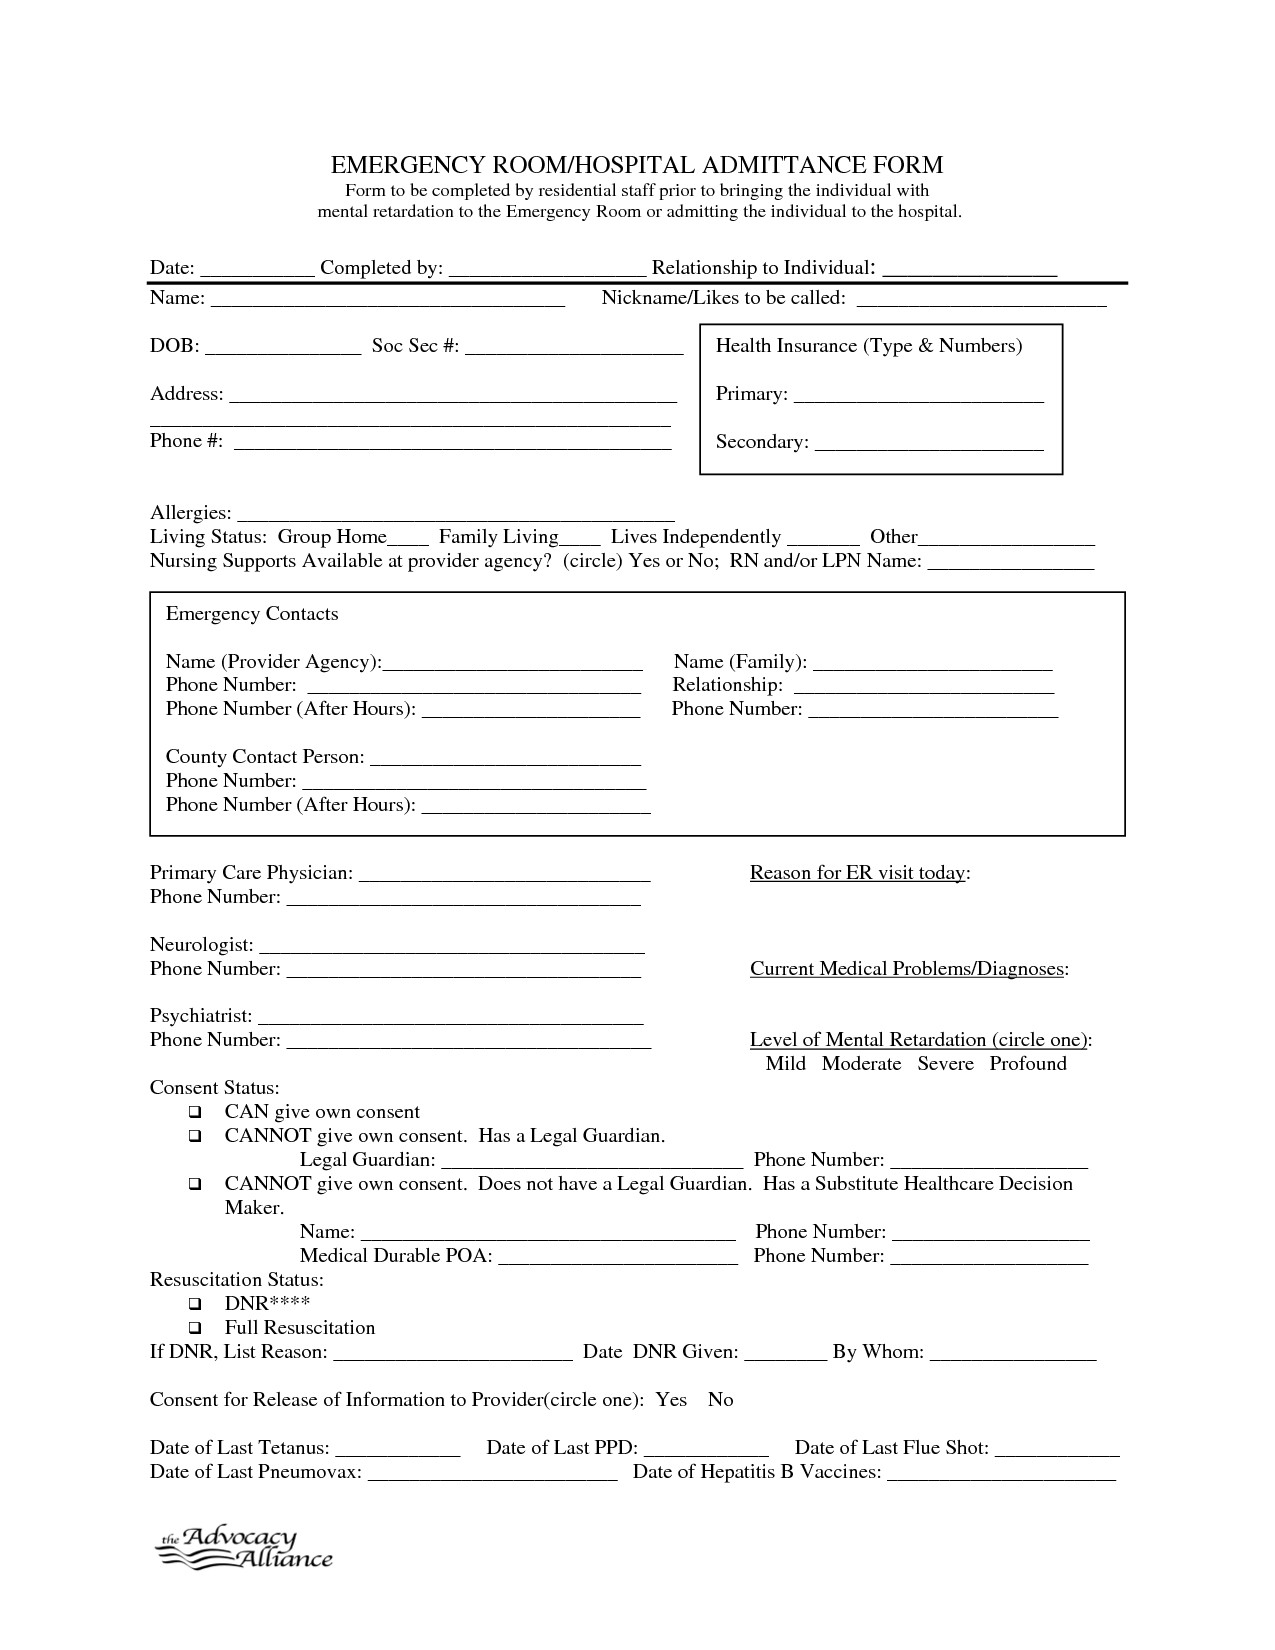 Patient Discharge form Template Hospital Discharge Papers forms Nice Visual